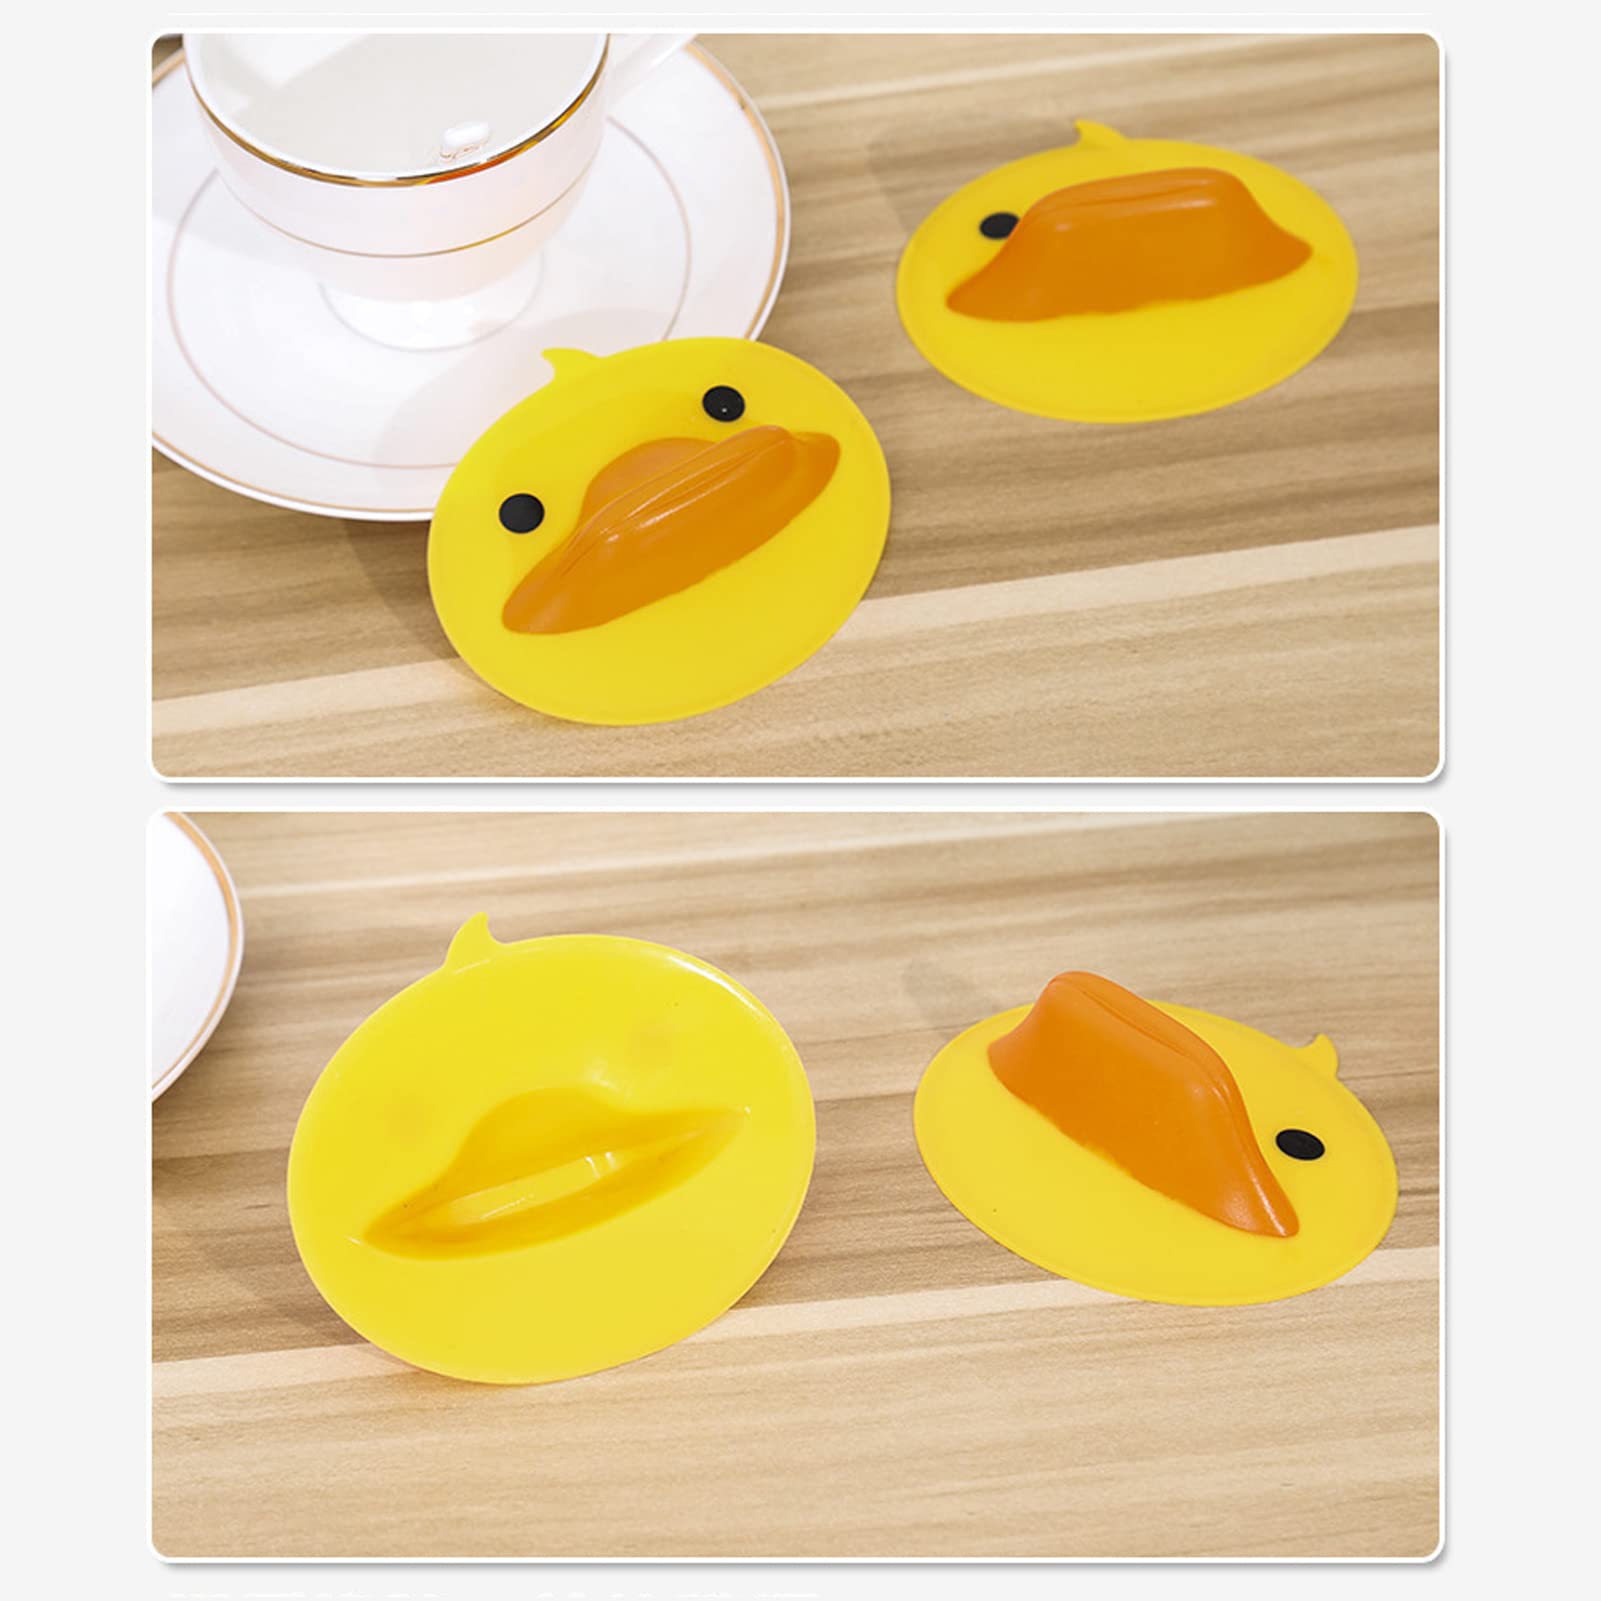 Mini Silicon Heat Resistant Potholder - Mini Silicone Duck Animal Oven Mitts Gloves - Heat Resistant Little Yellow Duck Cartoon Clip for Baking and Pot-Holding, Baking Instant Kumprohu